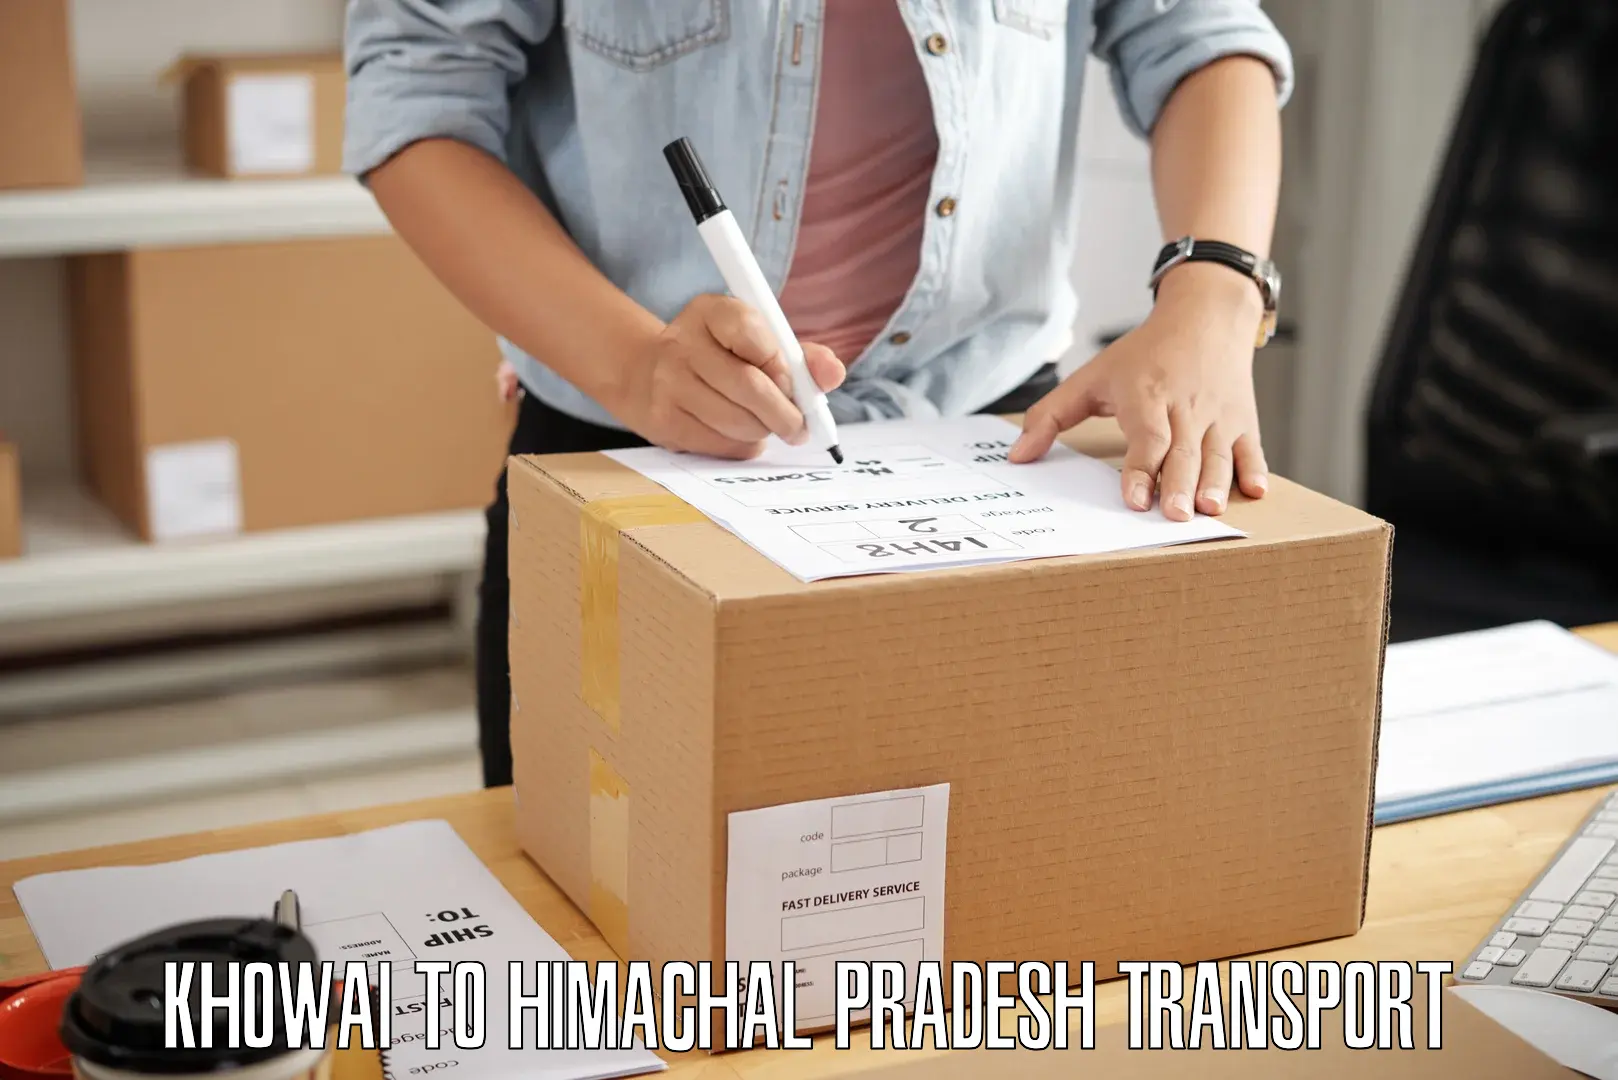 Daily parcel service transport Khowai to Ghumarwin